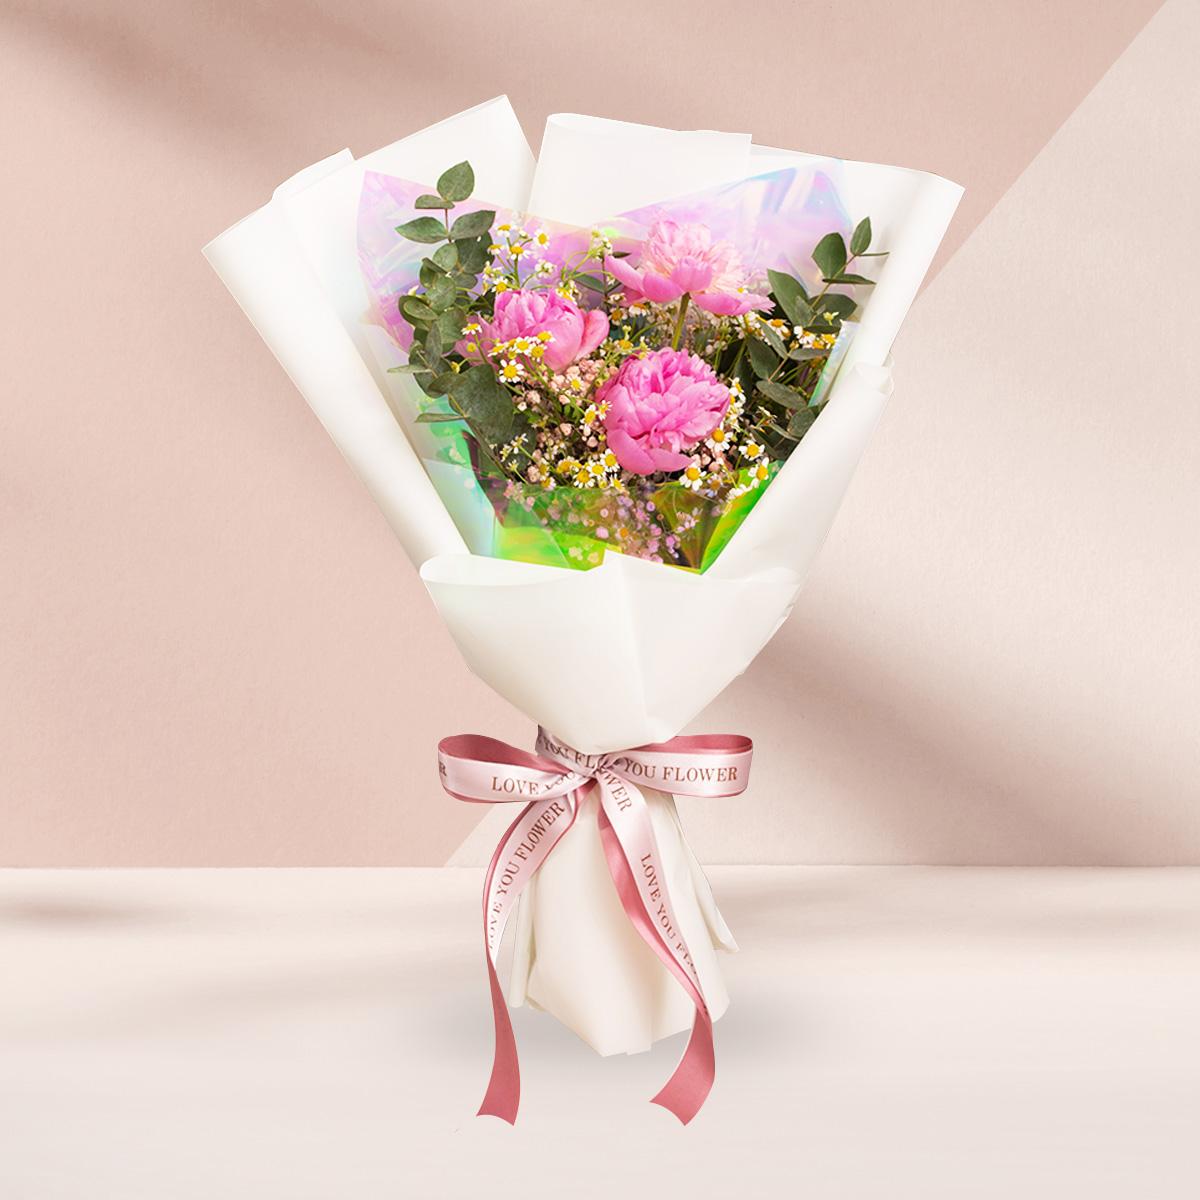 A341 Queen's Love 3 pink peonies with eucalyptus radiata leaves, daisies, and light pink baby's breath, wrapped in white.